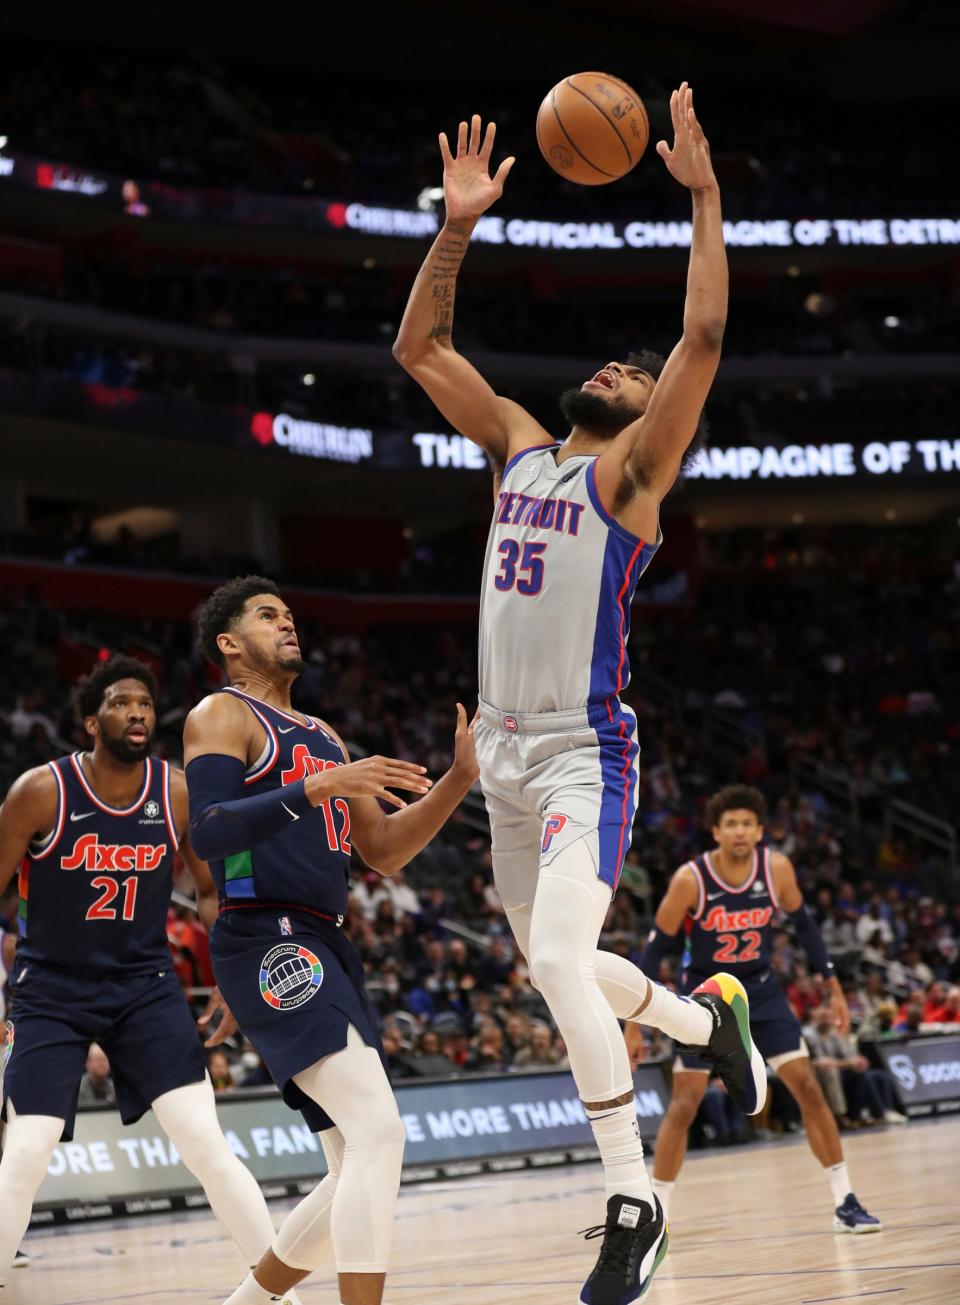 Detroit Pistons forward Marvin Bagley III (35) is fouled by Philadelphia 76ers forward Tobias Harris (12) during first quarter action on Thursday, March 31, 2022, at Little Caesars Arena in Detroit.